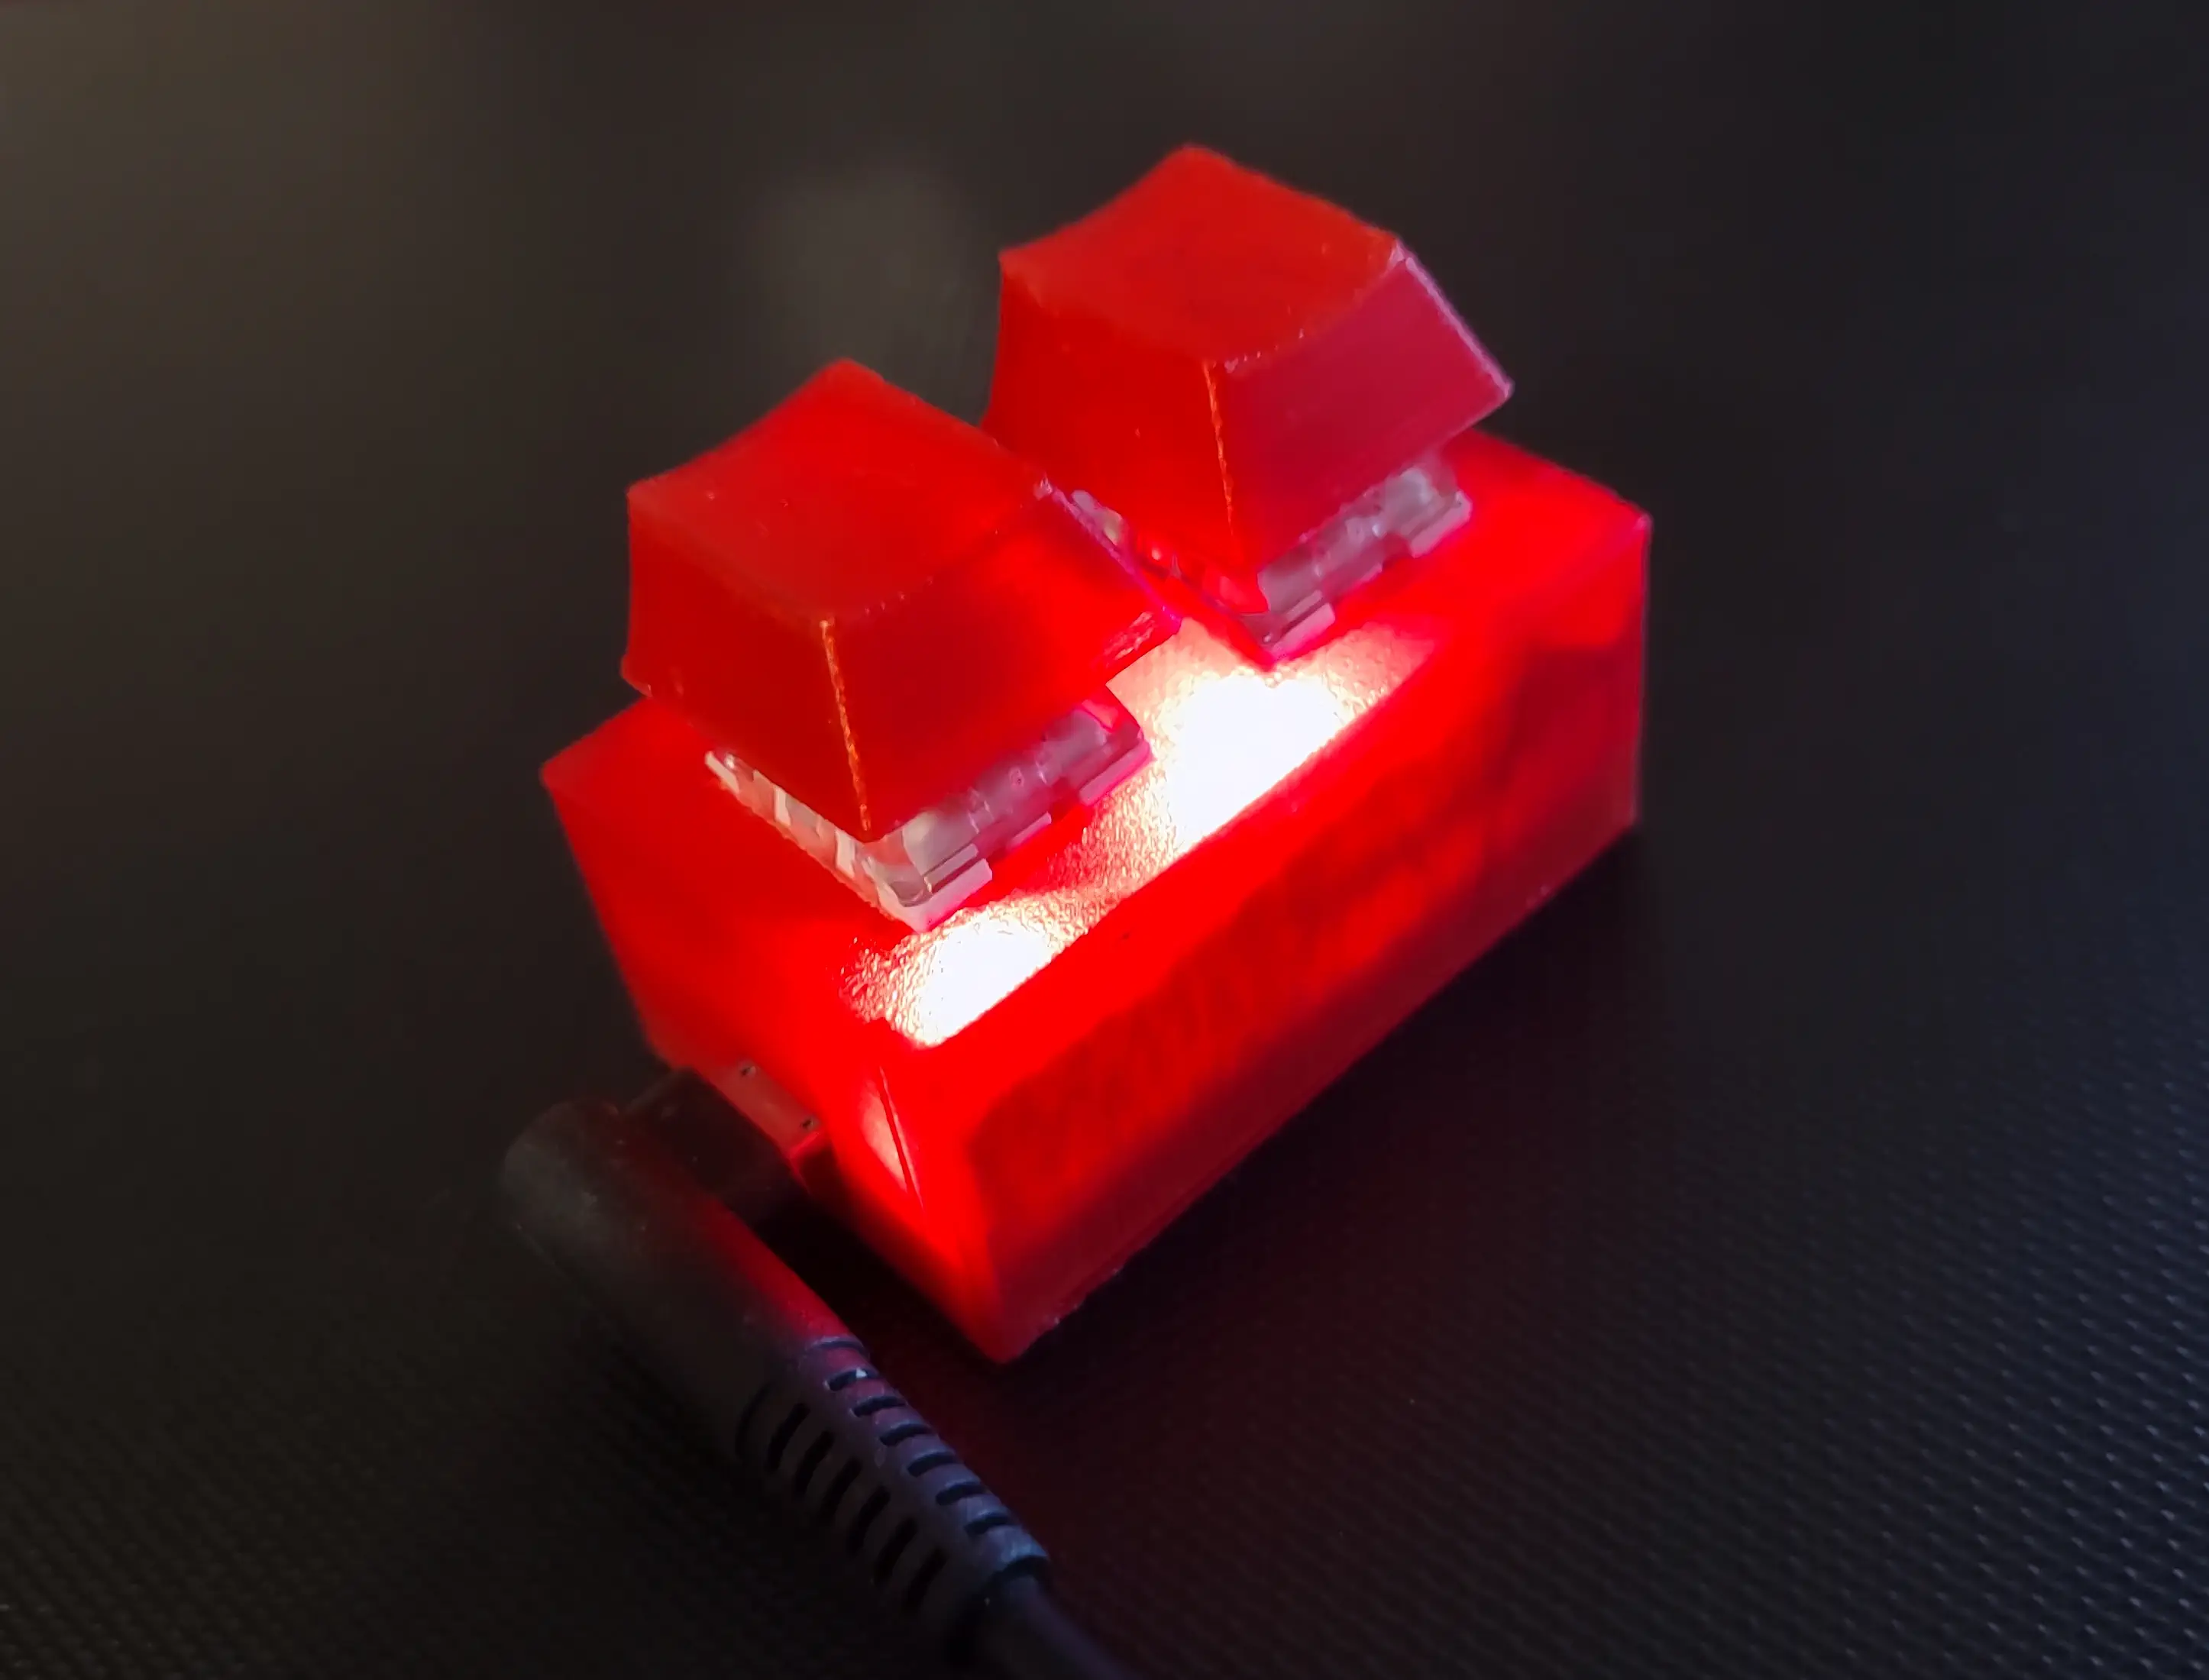 Picture of the 2 key keypad 3D printed in red filament with kalih box brown key switches.